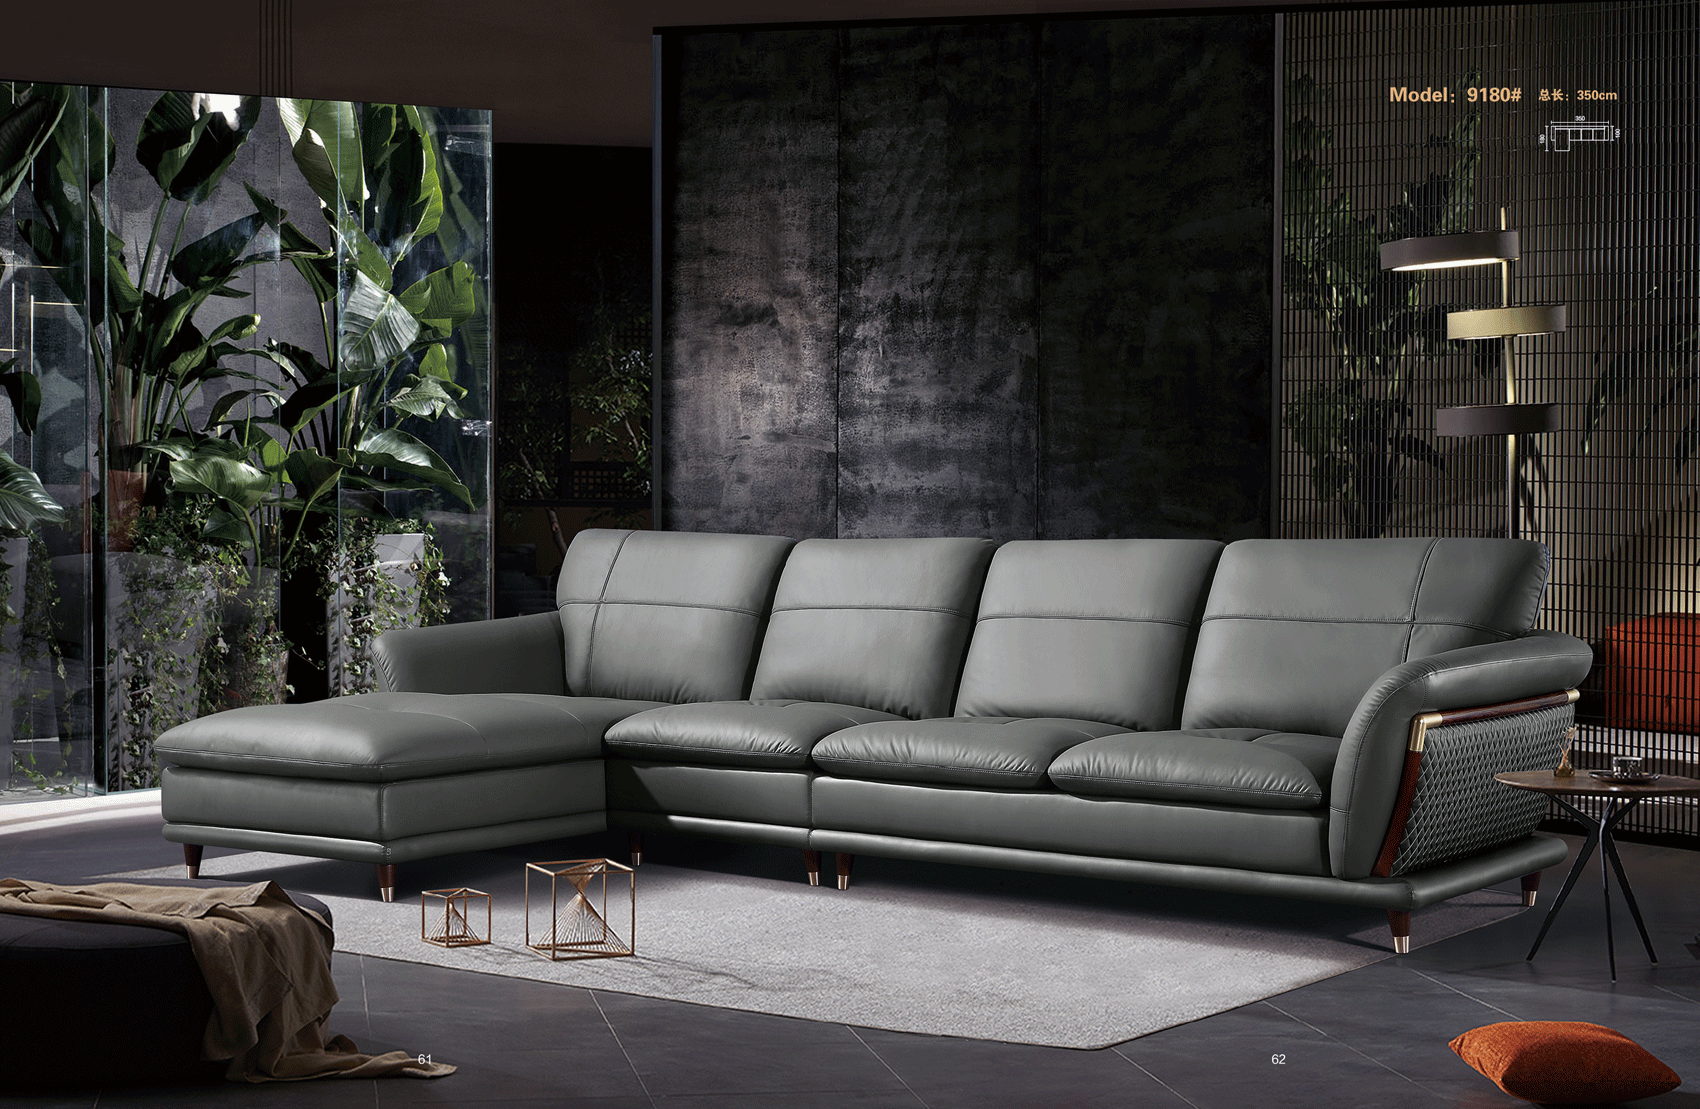 Living Room Furniture Sofas Loveseats and Chairs 9180 Sectional Left